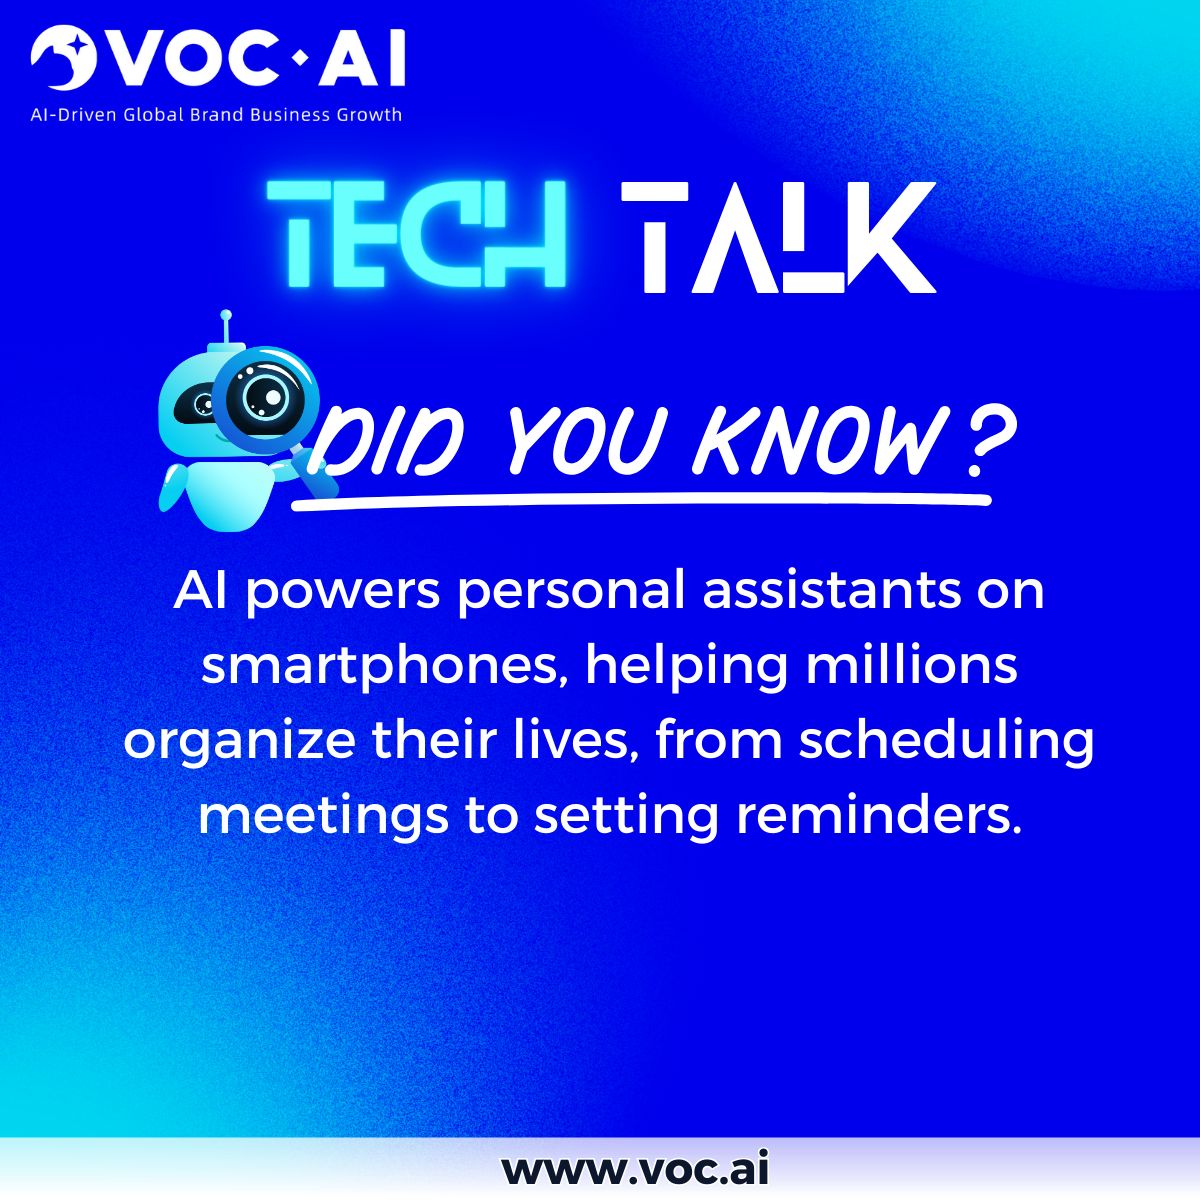 TECH TALK Sunday! 🤖 🔍 Did you know that? 🤔 AI serve as personal assistants 💯 Thanks to AI we have assistant anytime and anywhere ✅ Follow VOC.AI for more TECH TALKS! ✨👉 buff.ly/3UiYH0v #techtalk #sundaytrivia #Vocai #NewFeatures #chatgpt